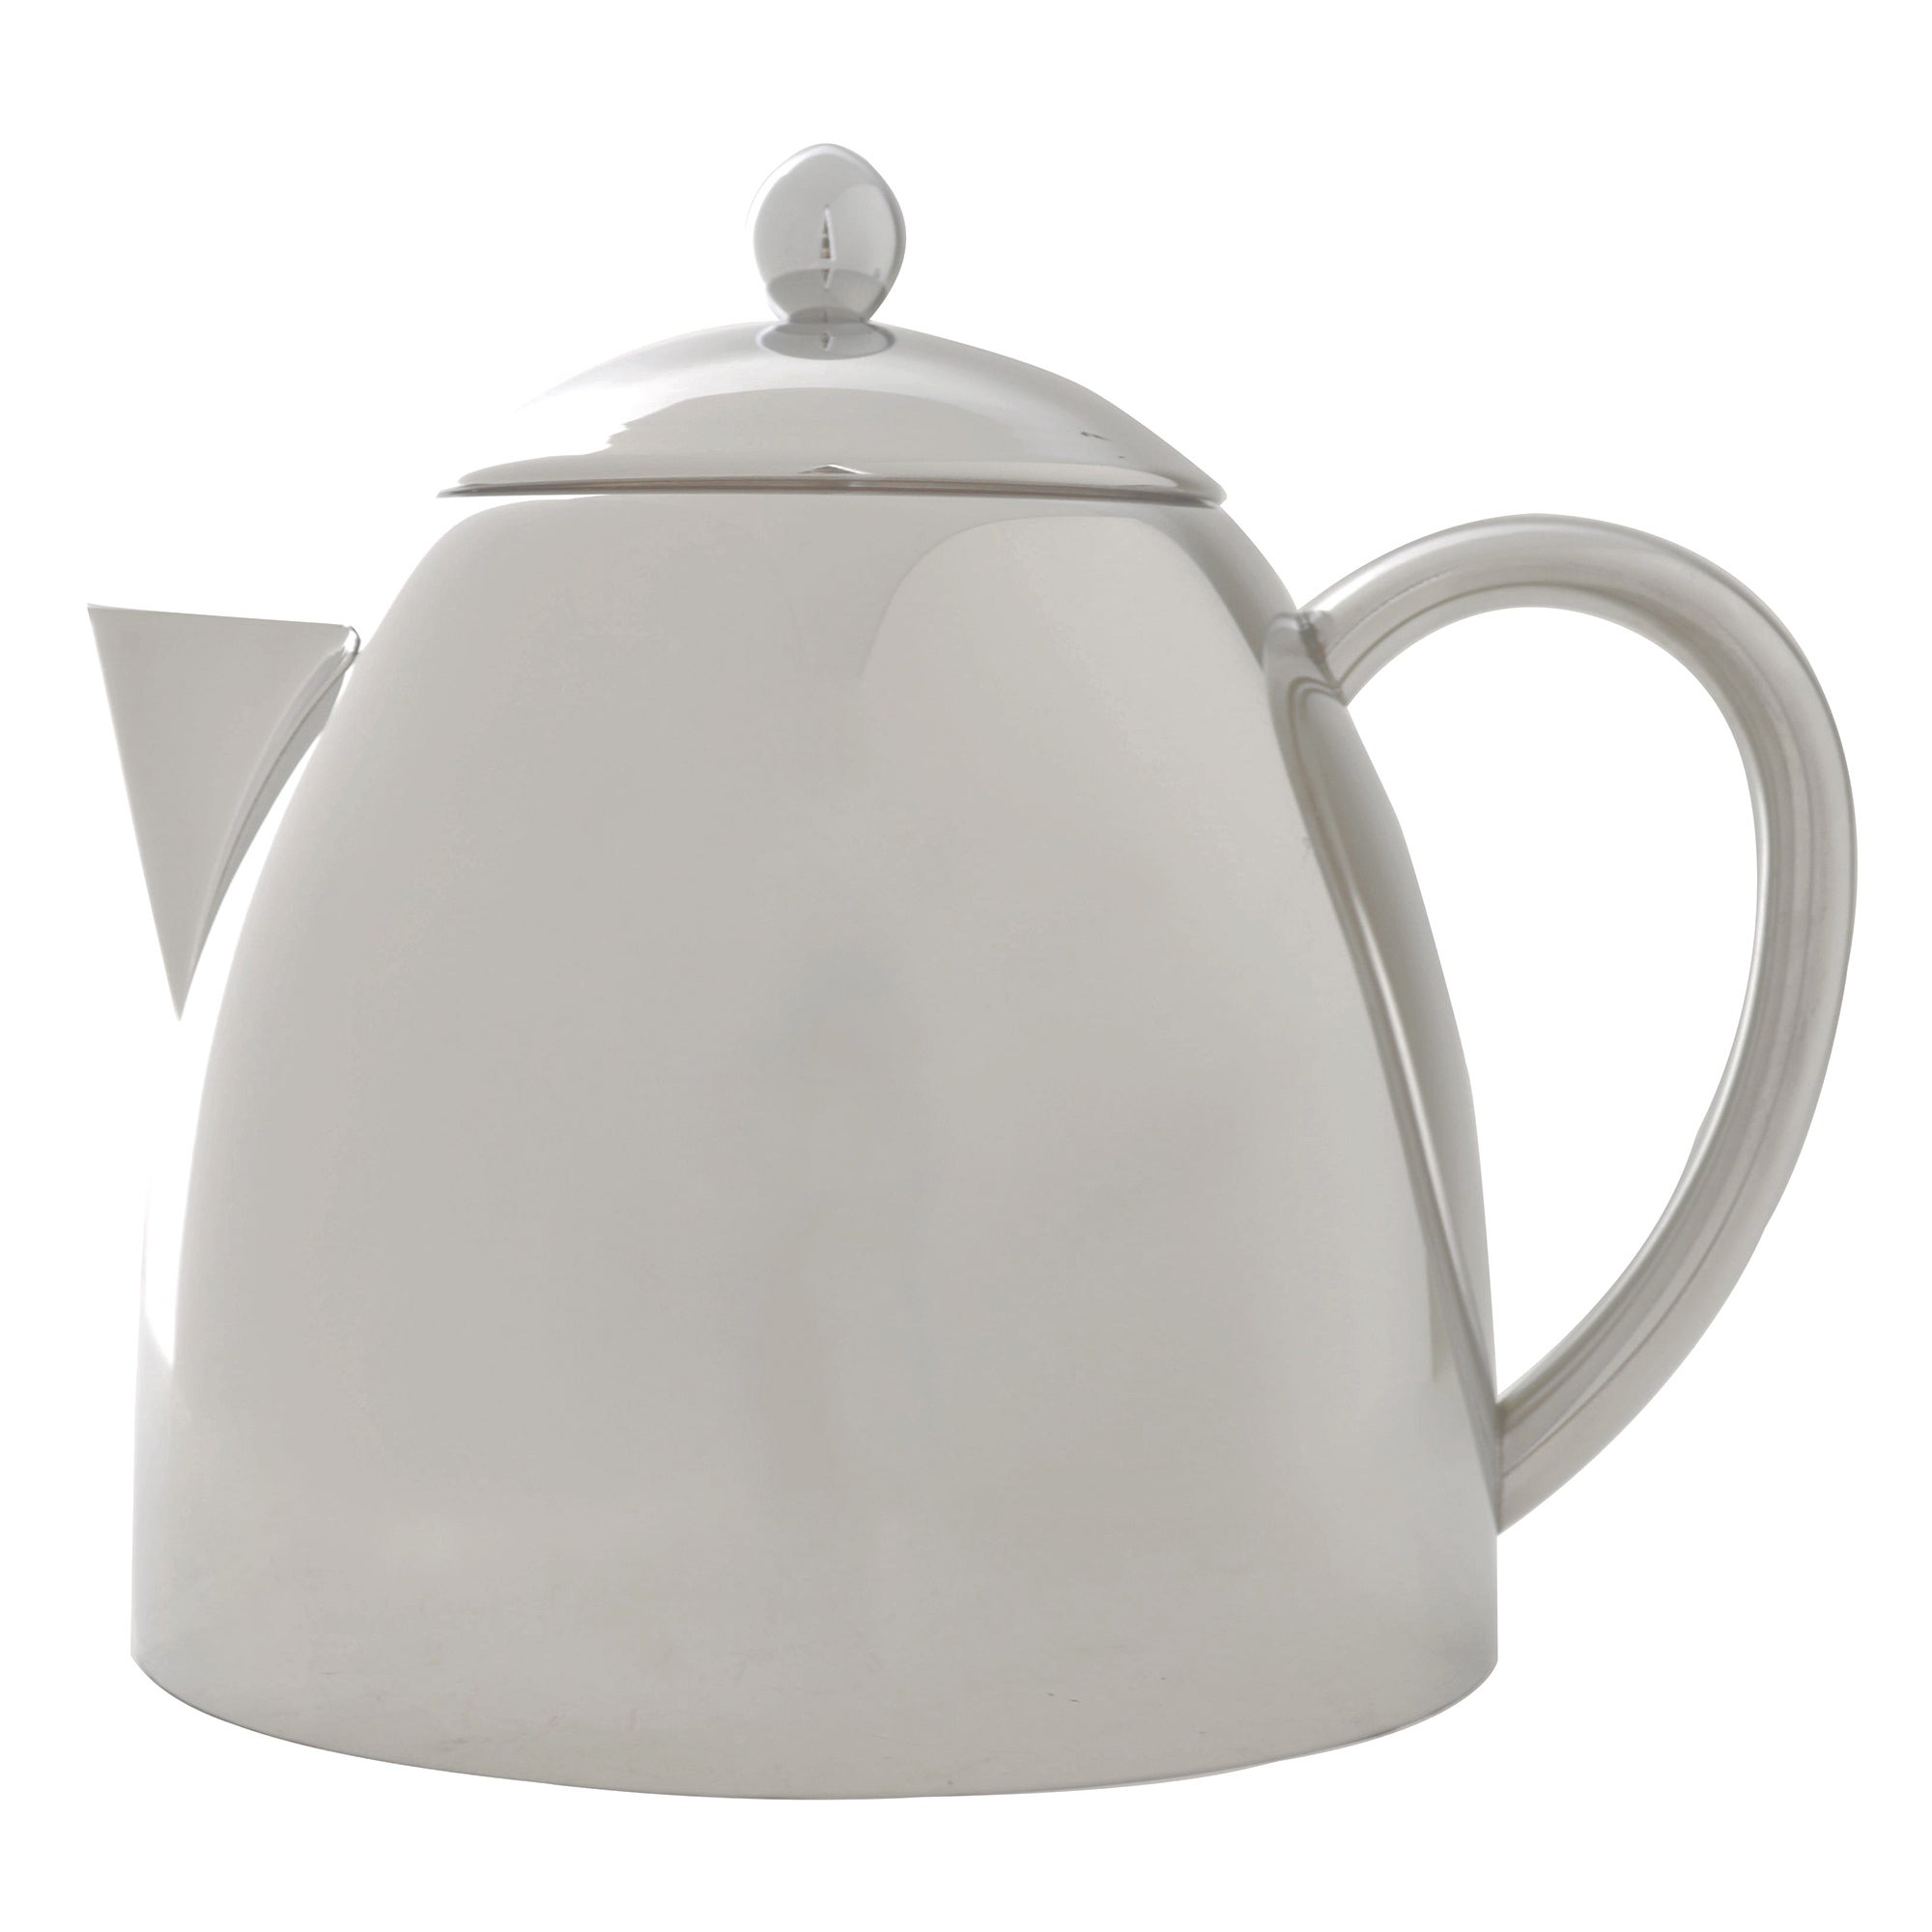 Image of 1.5 Litre Stainless Steel Teapot Silver